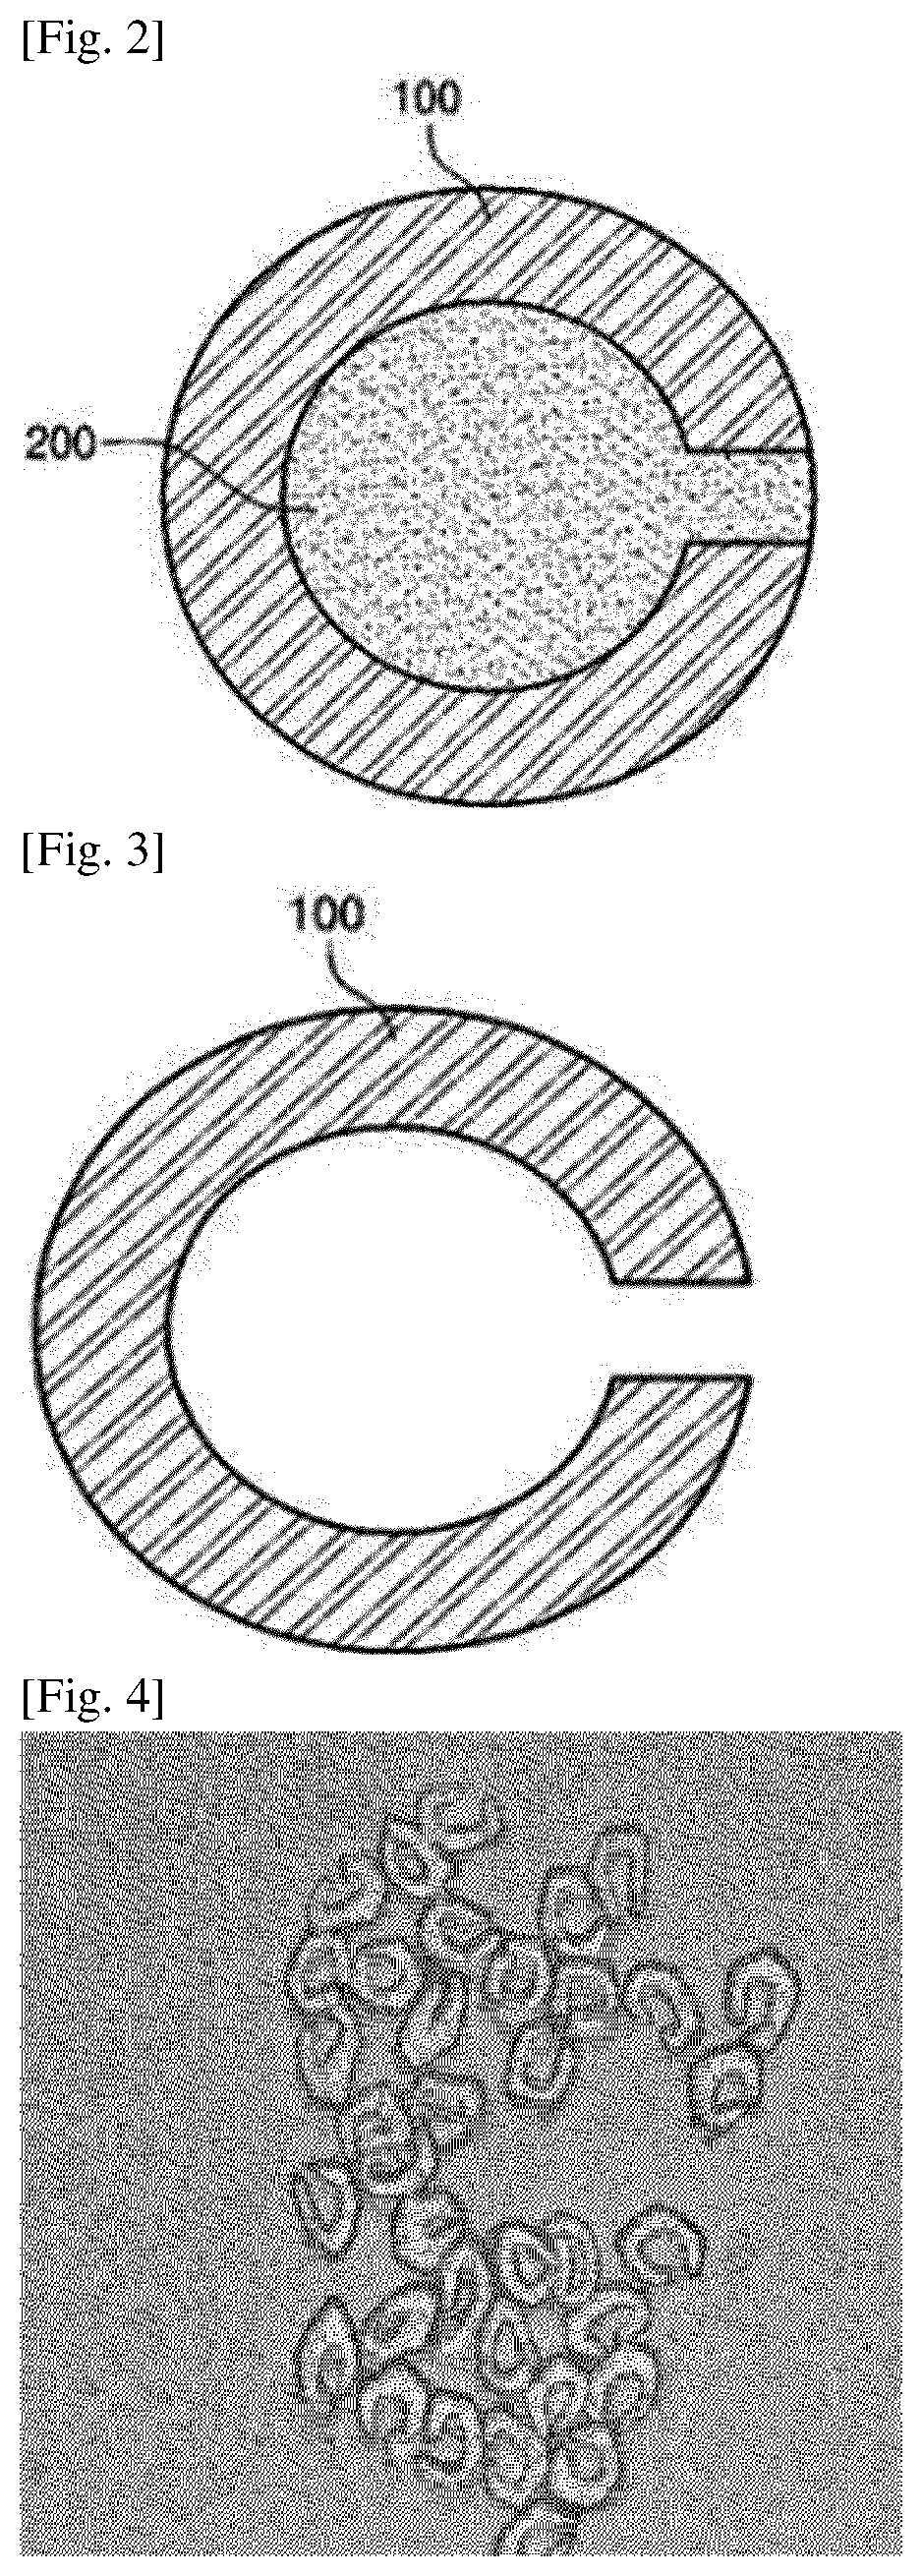 C-shaped composite fiber, C-shaped hollow fiber thereof, fabric including same, and method for manufacturing same